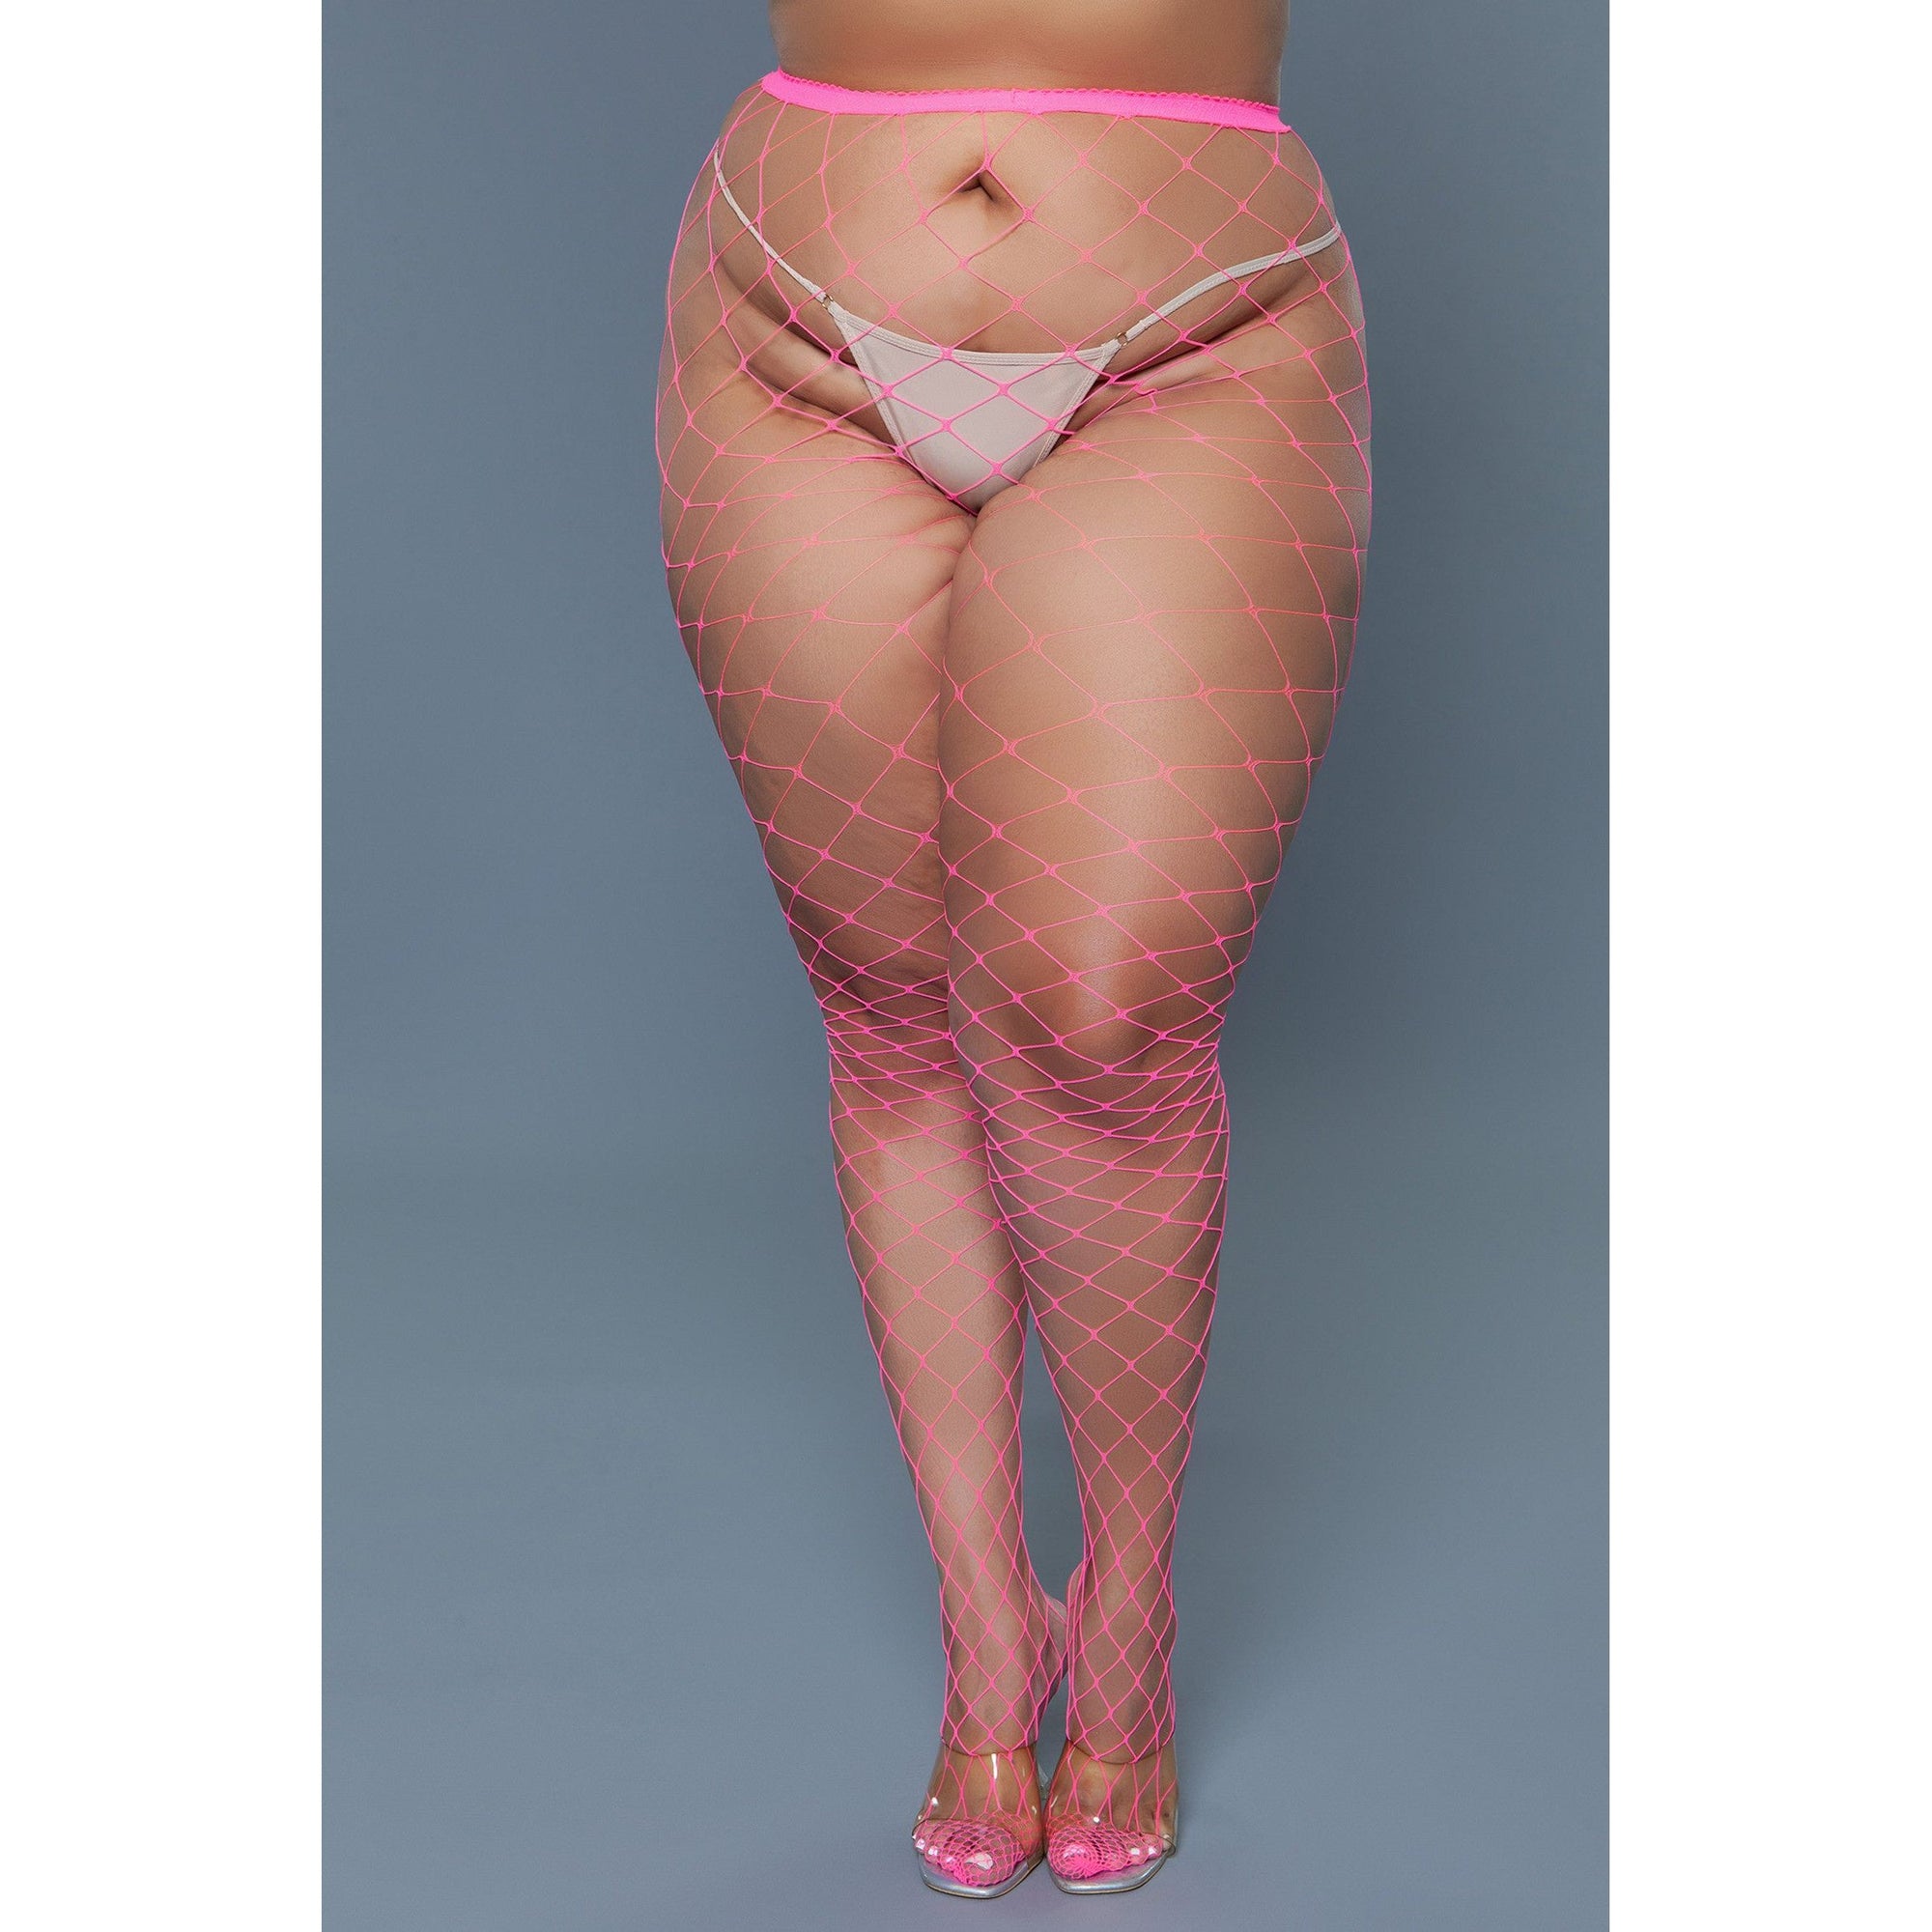 Oversized Fishnet Pantyhose by Be Wicked